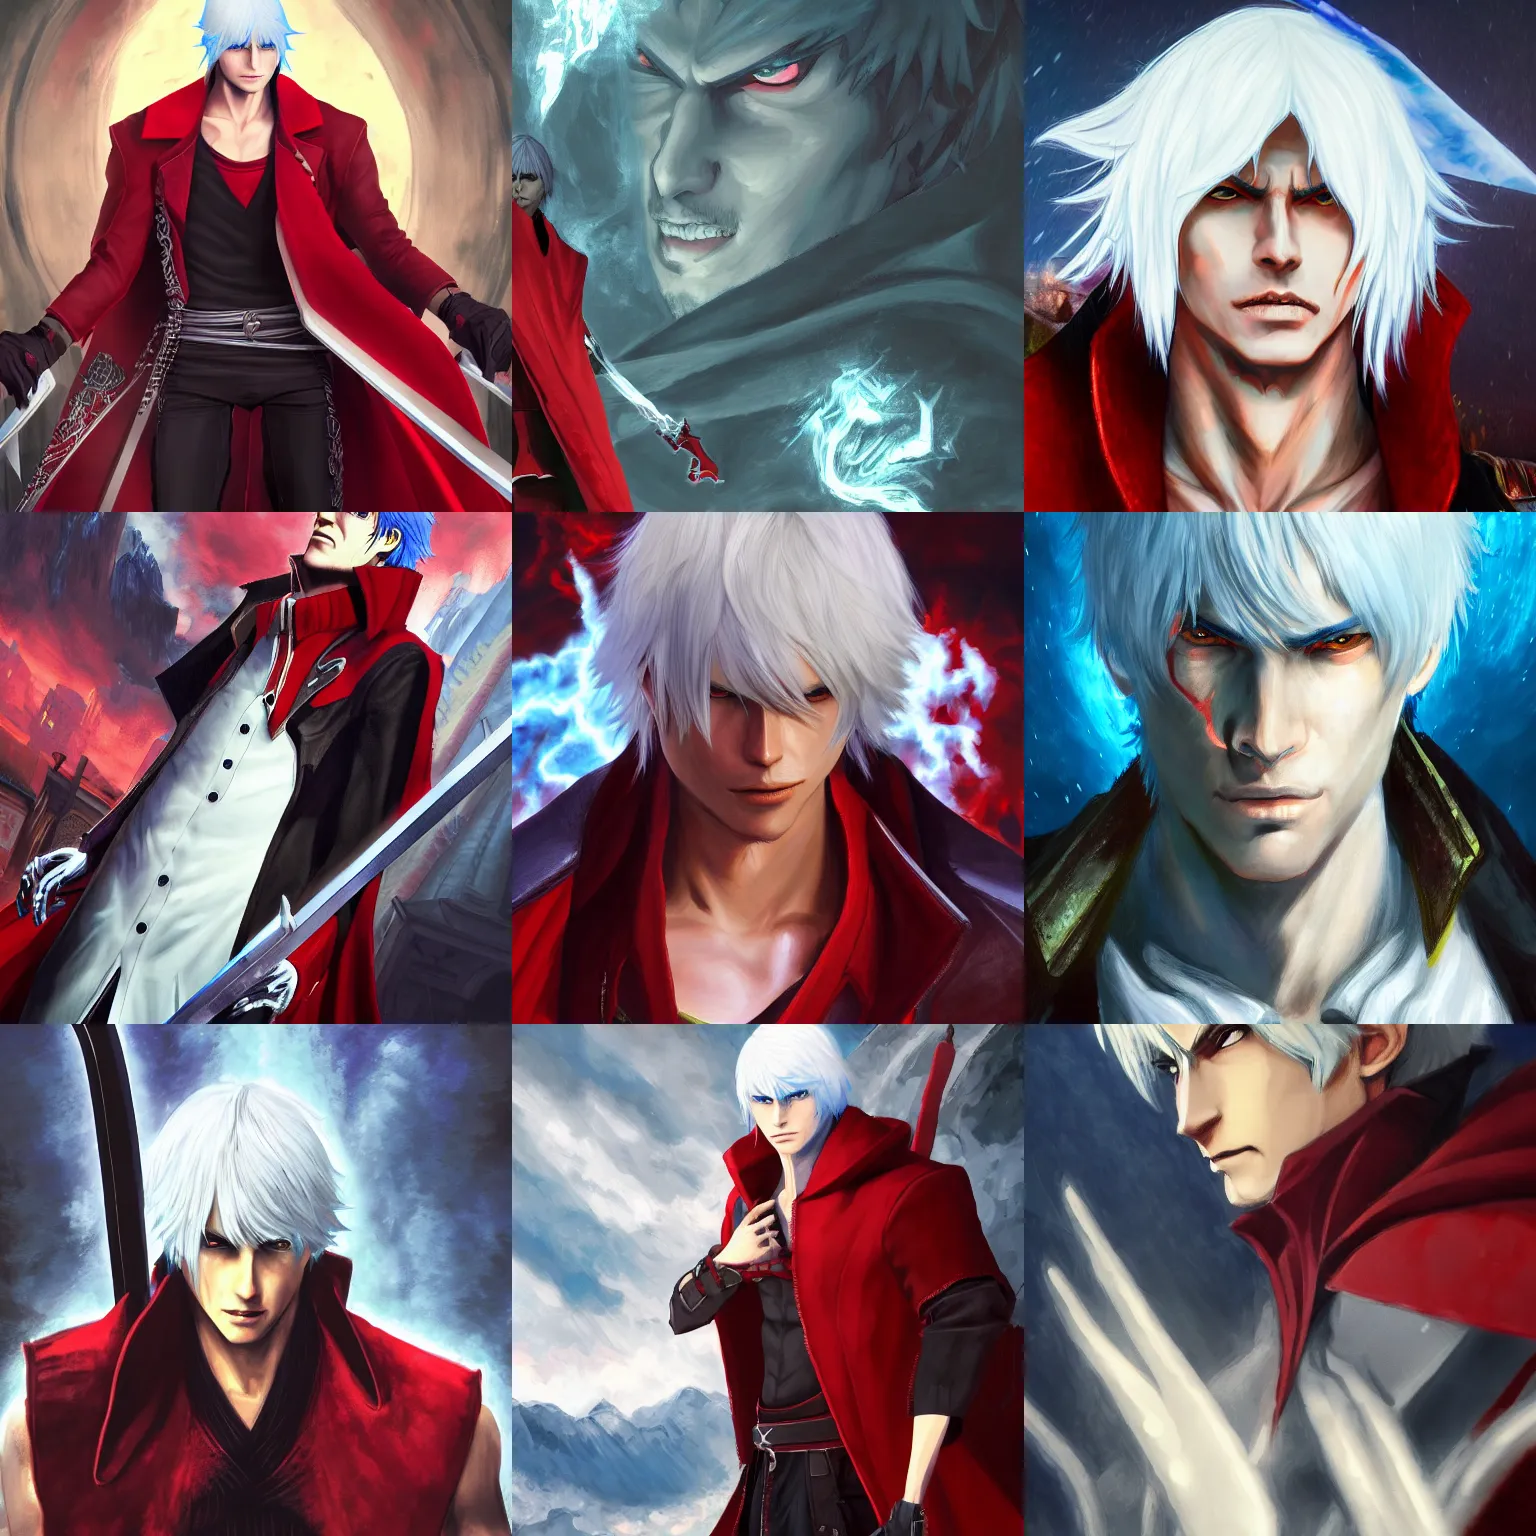 Dante character from devil may cry 5 with 2010s anime trait